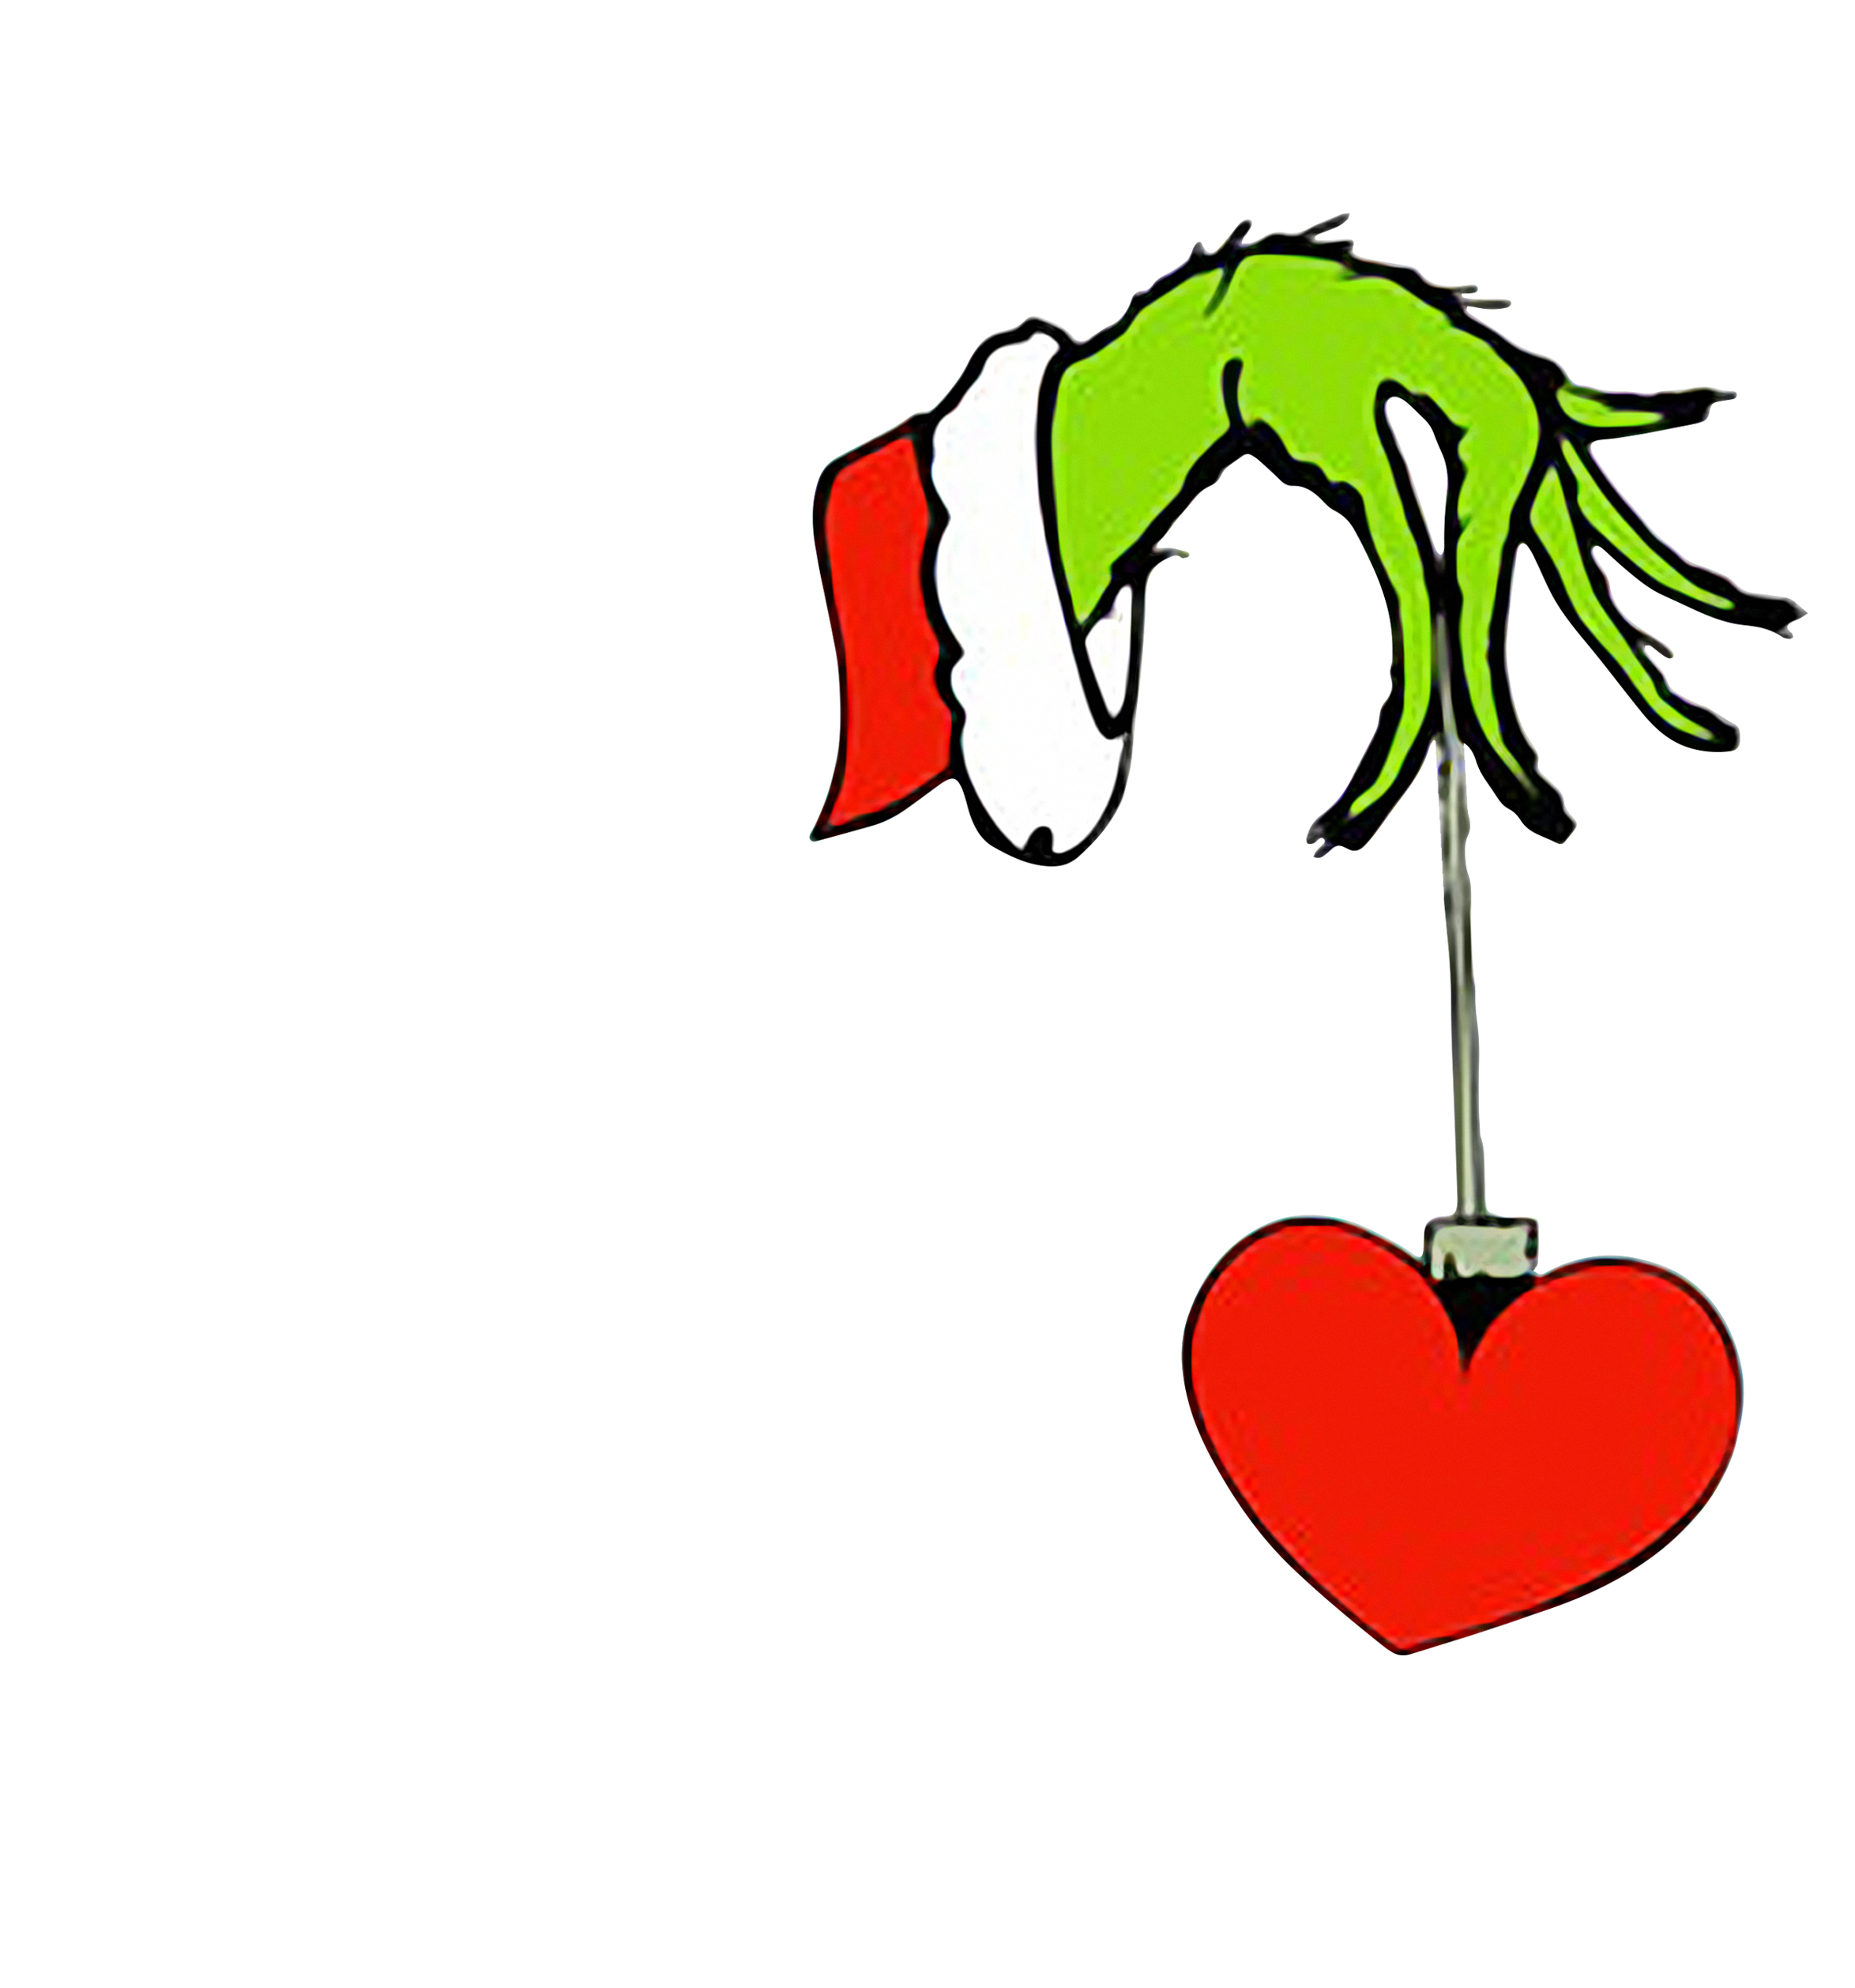 Grinch My Students Stole My Heart Christmas Shirt, - Grinch My Students Stole My Heart Christmas Shirt, (2400x3200)